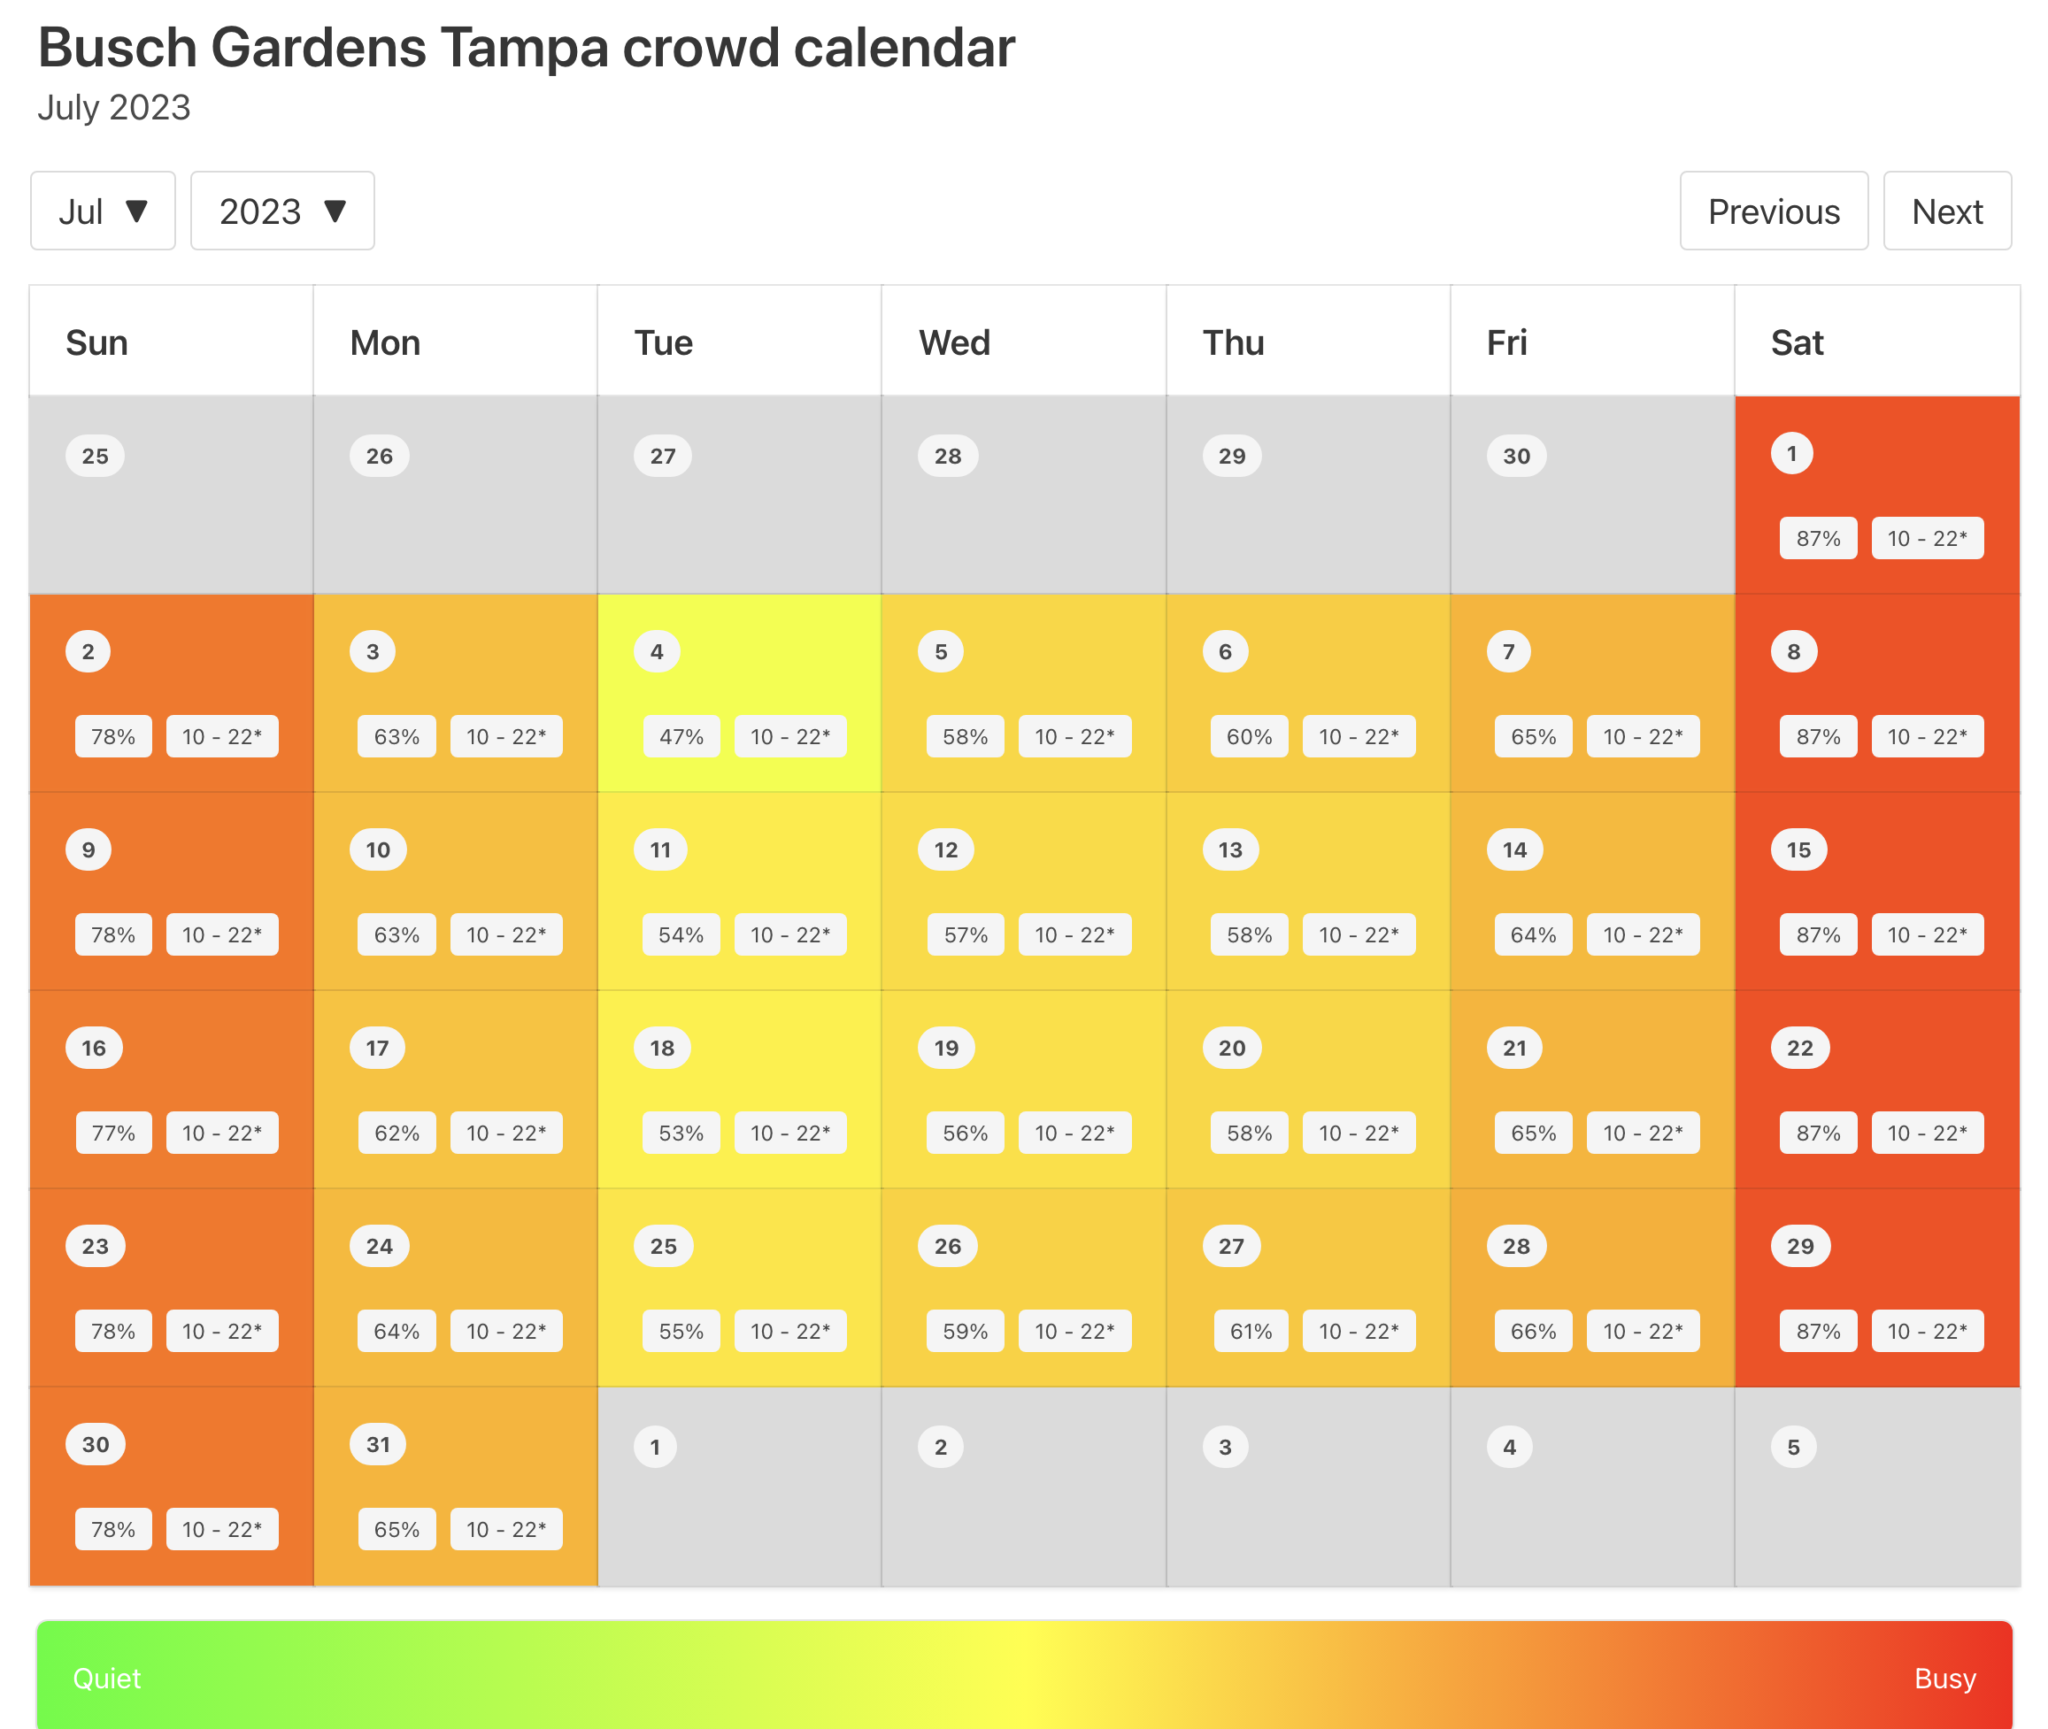 2023-busch-gardens-tampa-crowd-calendar-avoid-the-busy-days-themeparkhipster